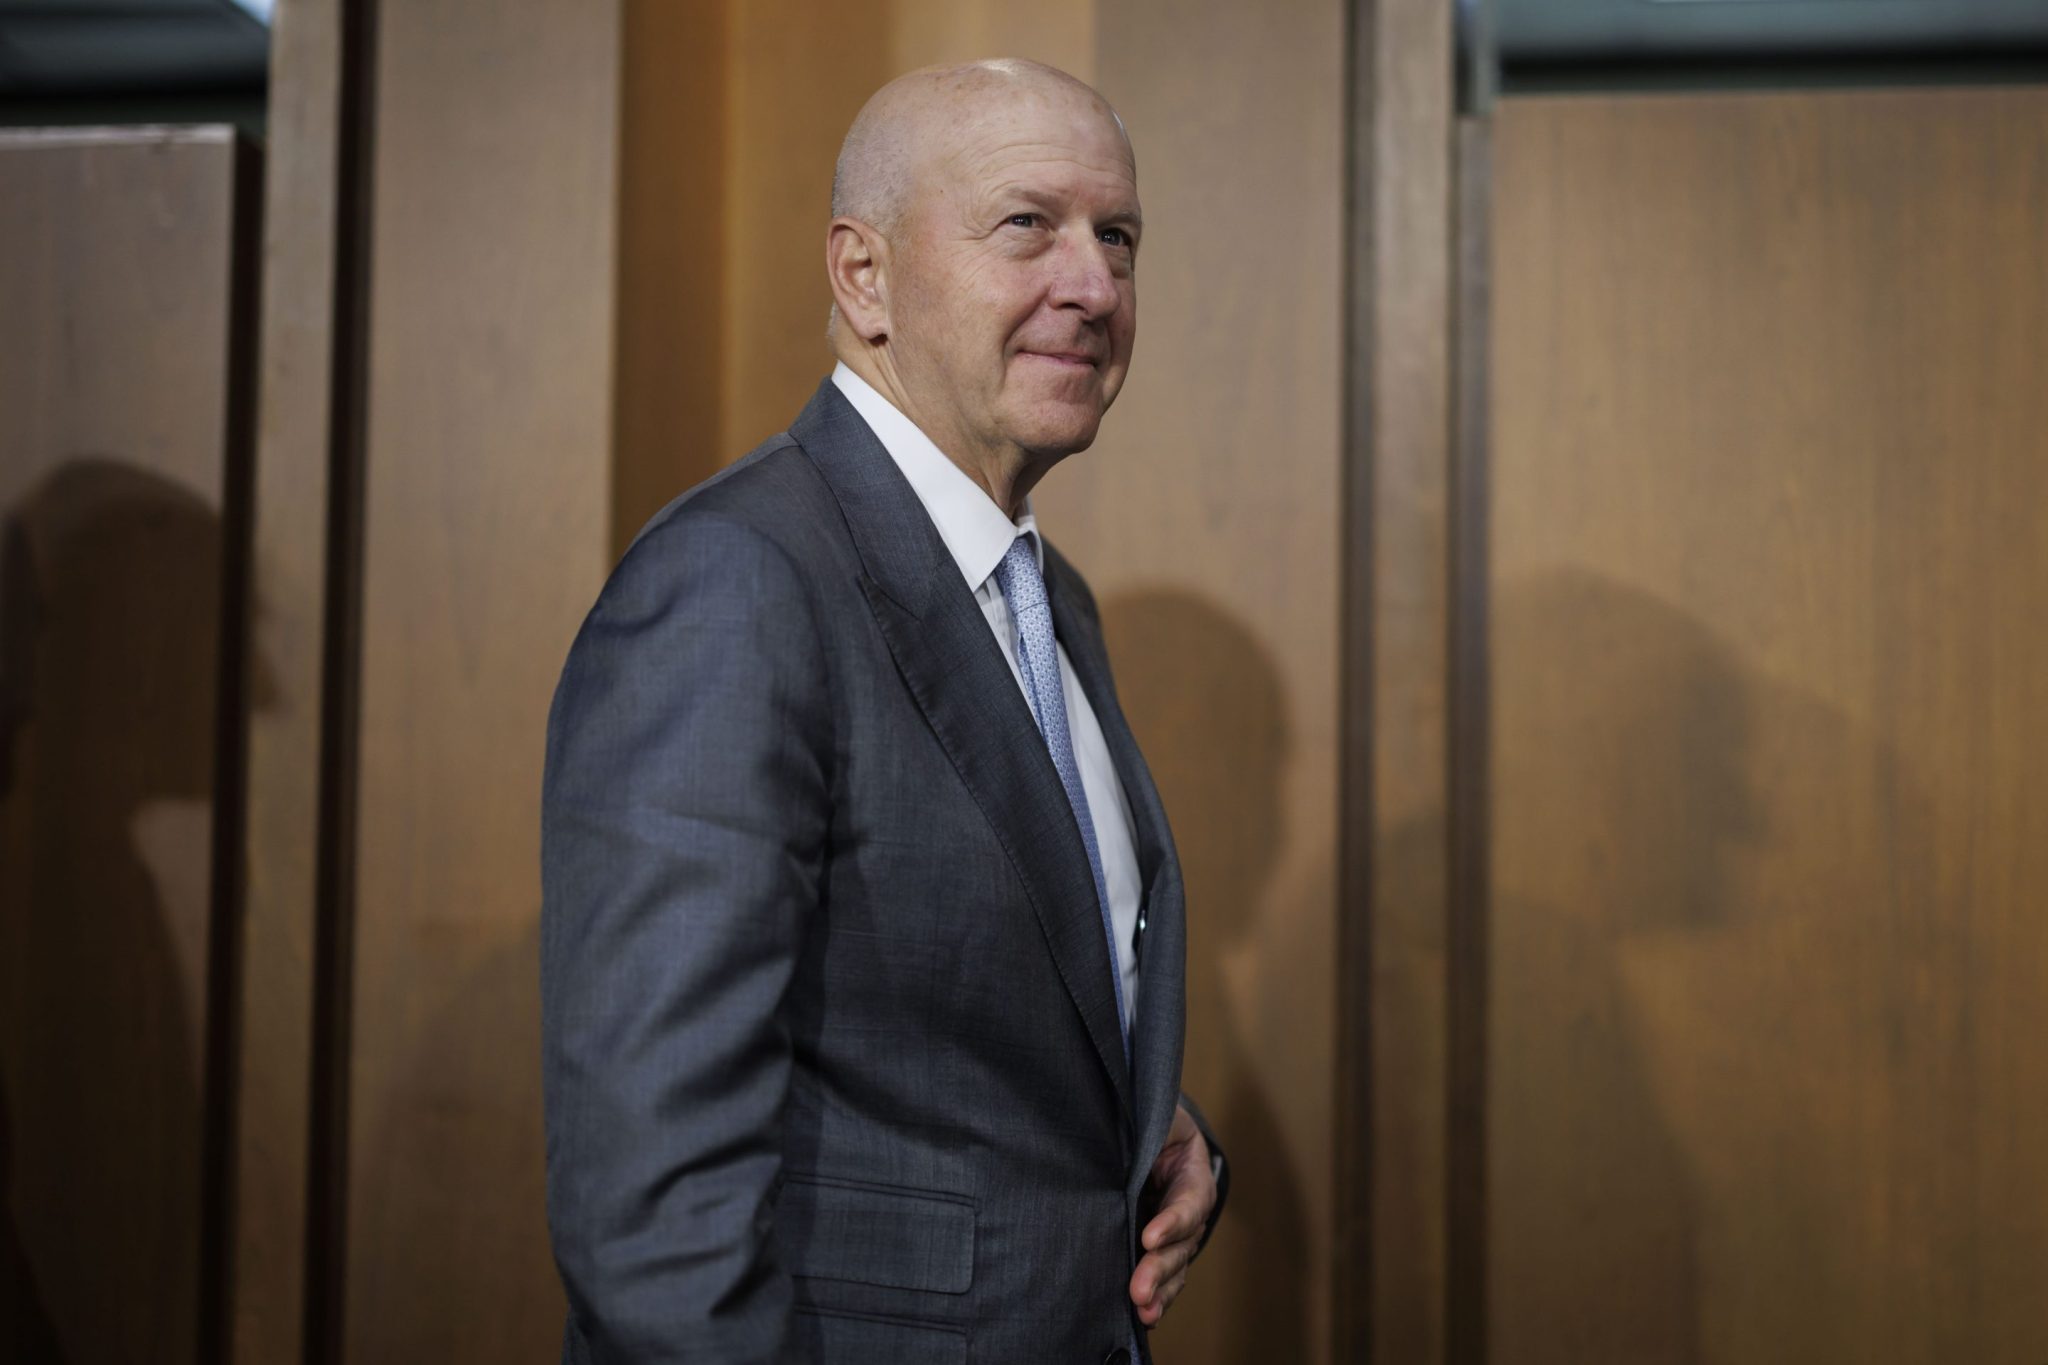 Goldman Sachs’ CEO says AI is driving companies to reinvent themselves at an ‘unprecedented’ scale